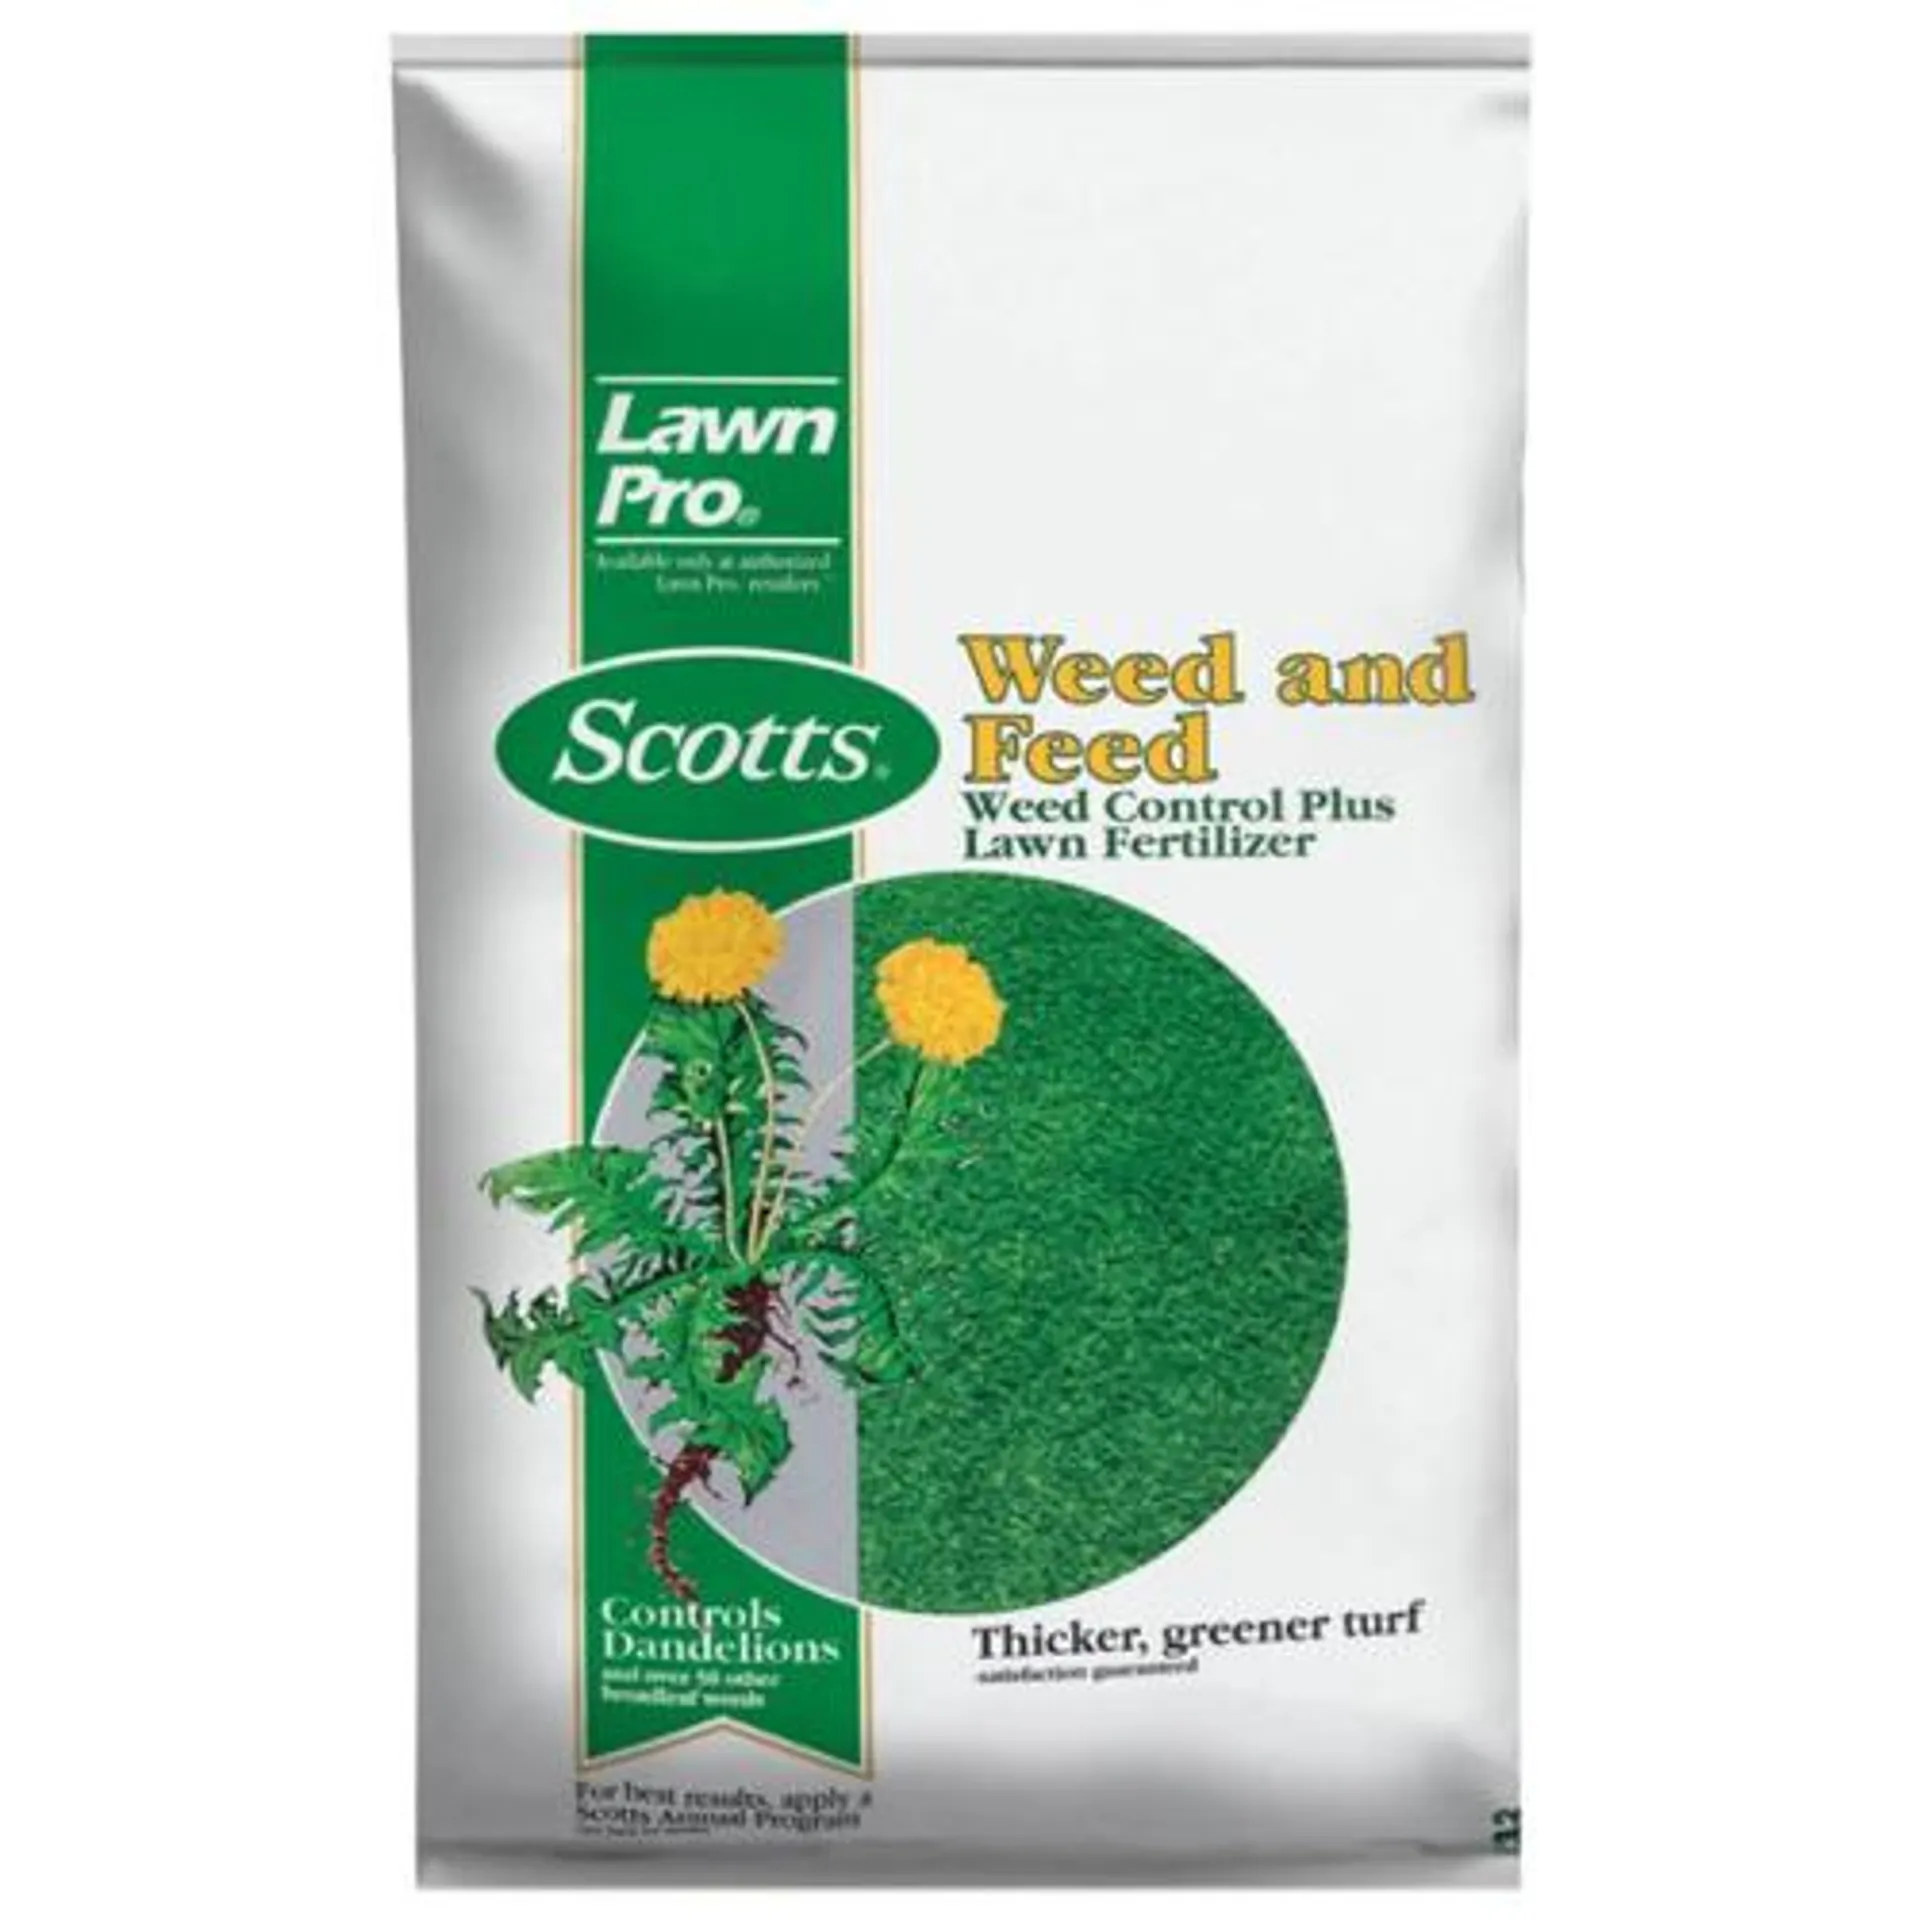 Scotts Lawn Pro Weed & Feed